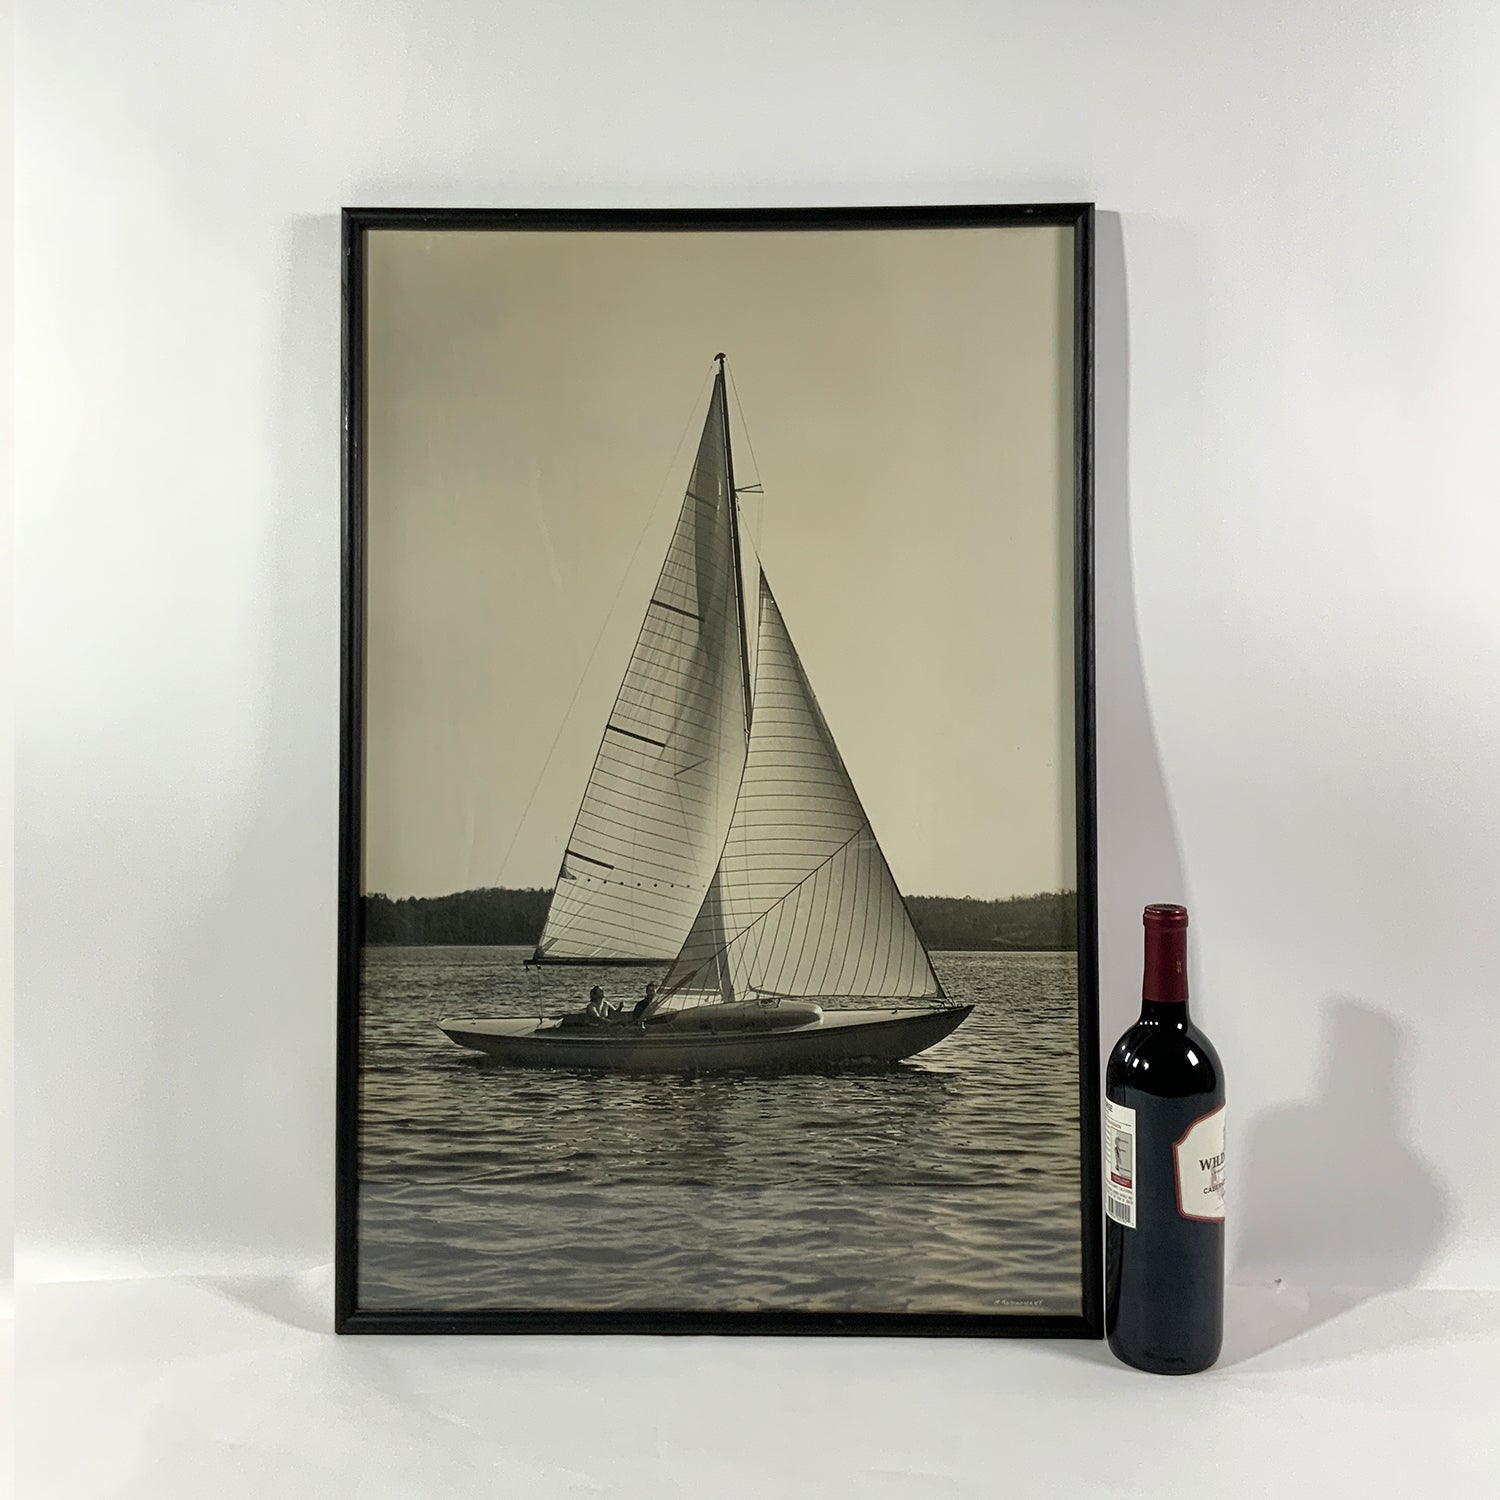 Morris Rosenfeld Black And White Photograph Of A Marconi-Rigged Sloop - Lannan Gallery